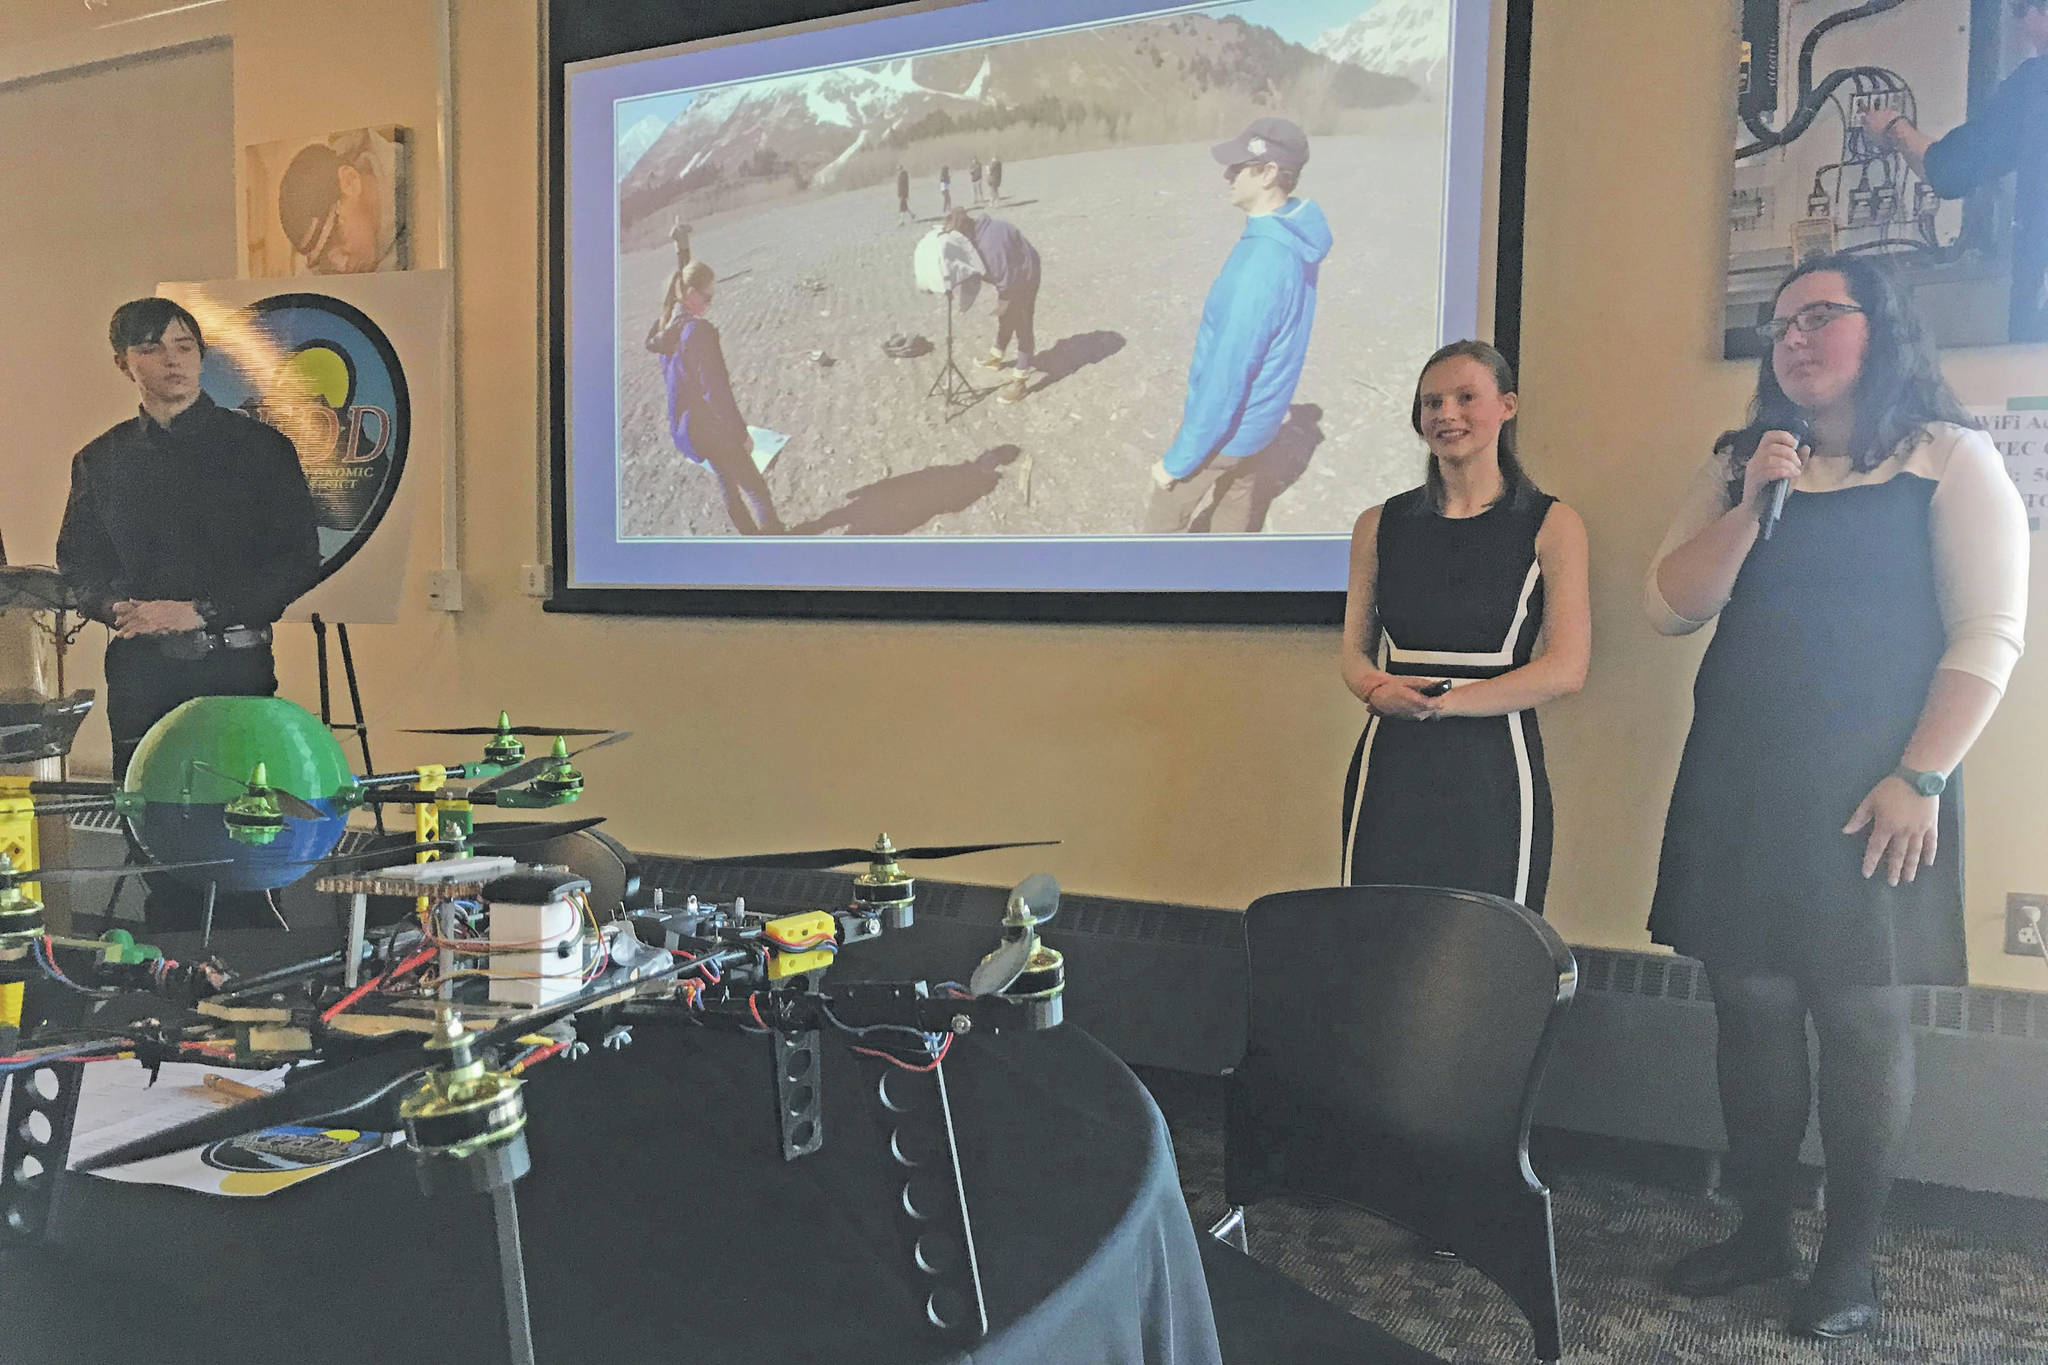 Seward High School students (from left) Tayten Barhaug, Lindy Guernsey and Akilena Veach demonstrate their Caring for the Kenai project, drones to help map the flood planes of Seward, during the Industry Outlook Forum in Seward on Wednesday. (Photo by Kat Sorensen/Peninsula Clarion)